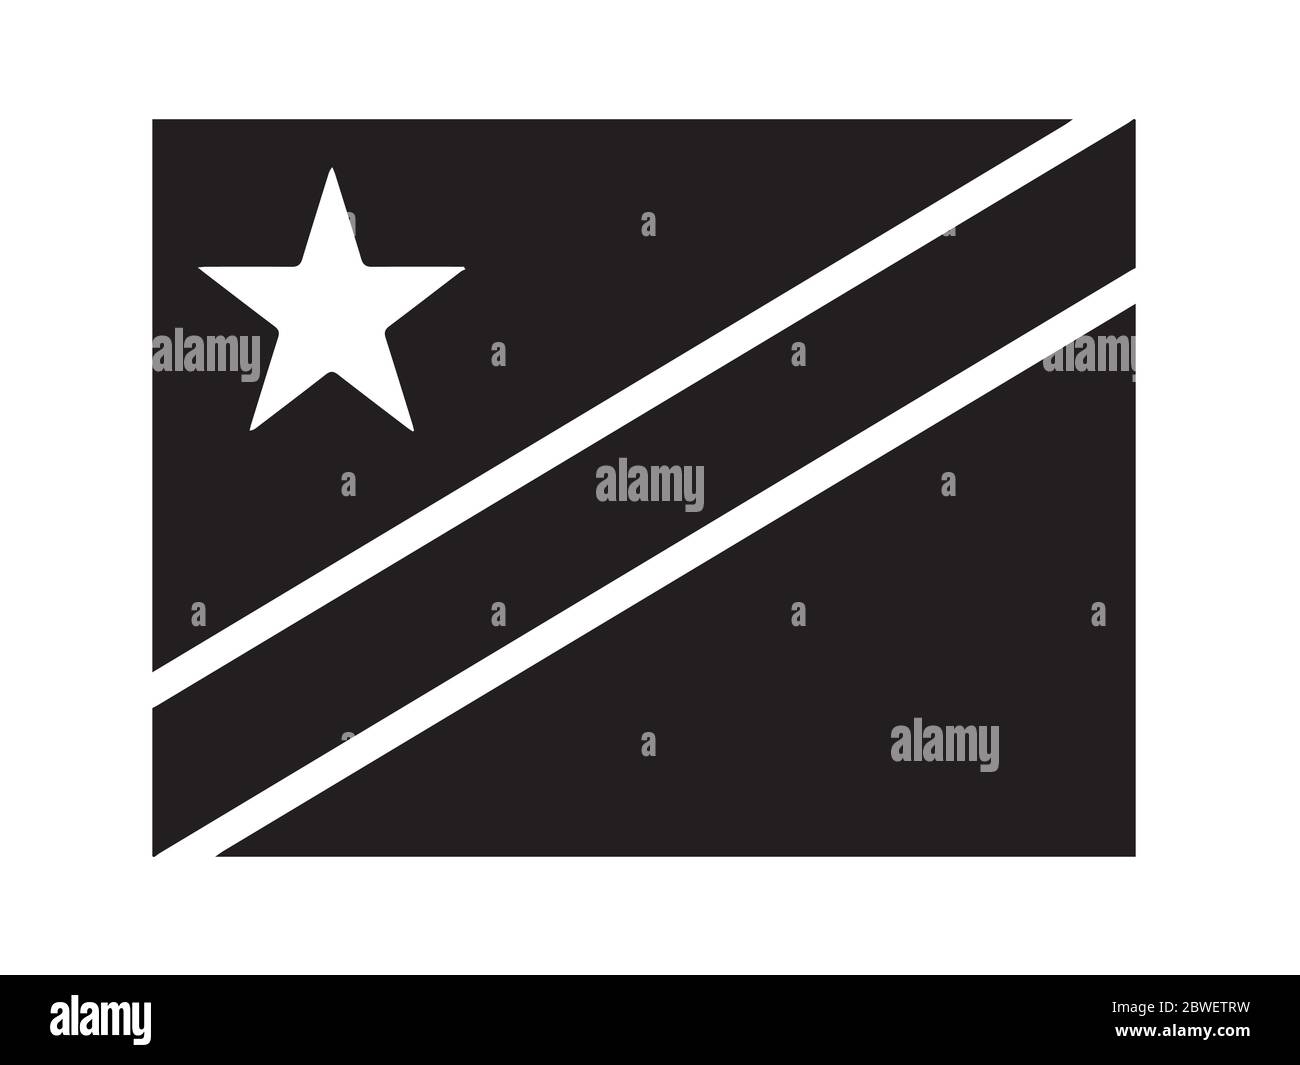 https://c8.alamy.com/comp/2BWETRW/democratic-republic-of-the-congo-flag-black-and-white-country-national-emblem-banner-monochrome-grayscale-eps-vector-file-2BWETRW.jpg